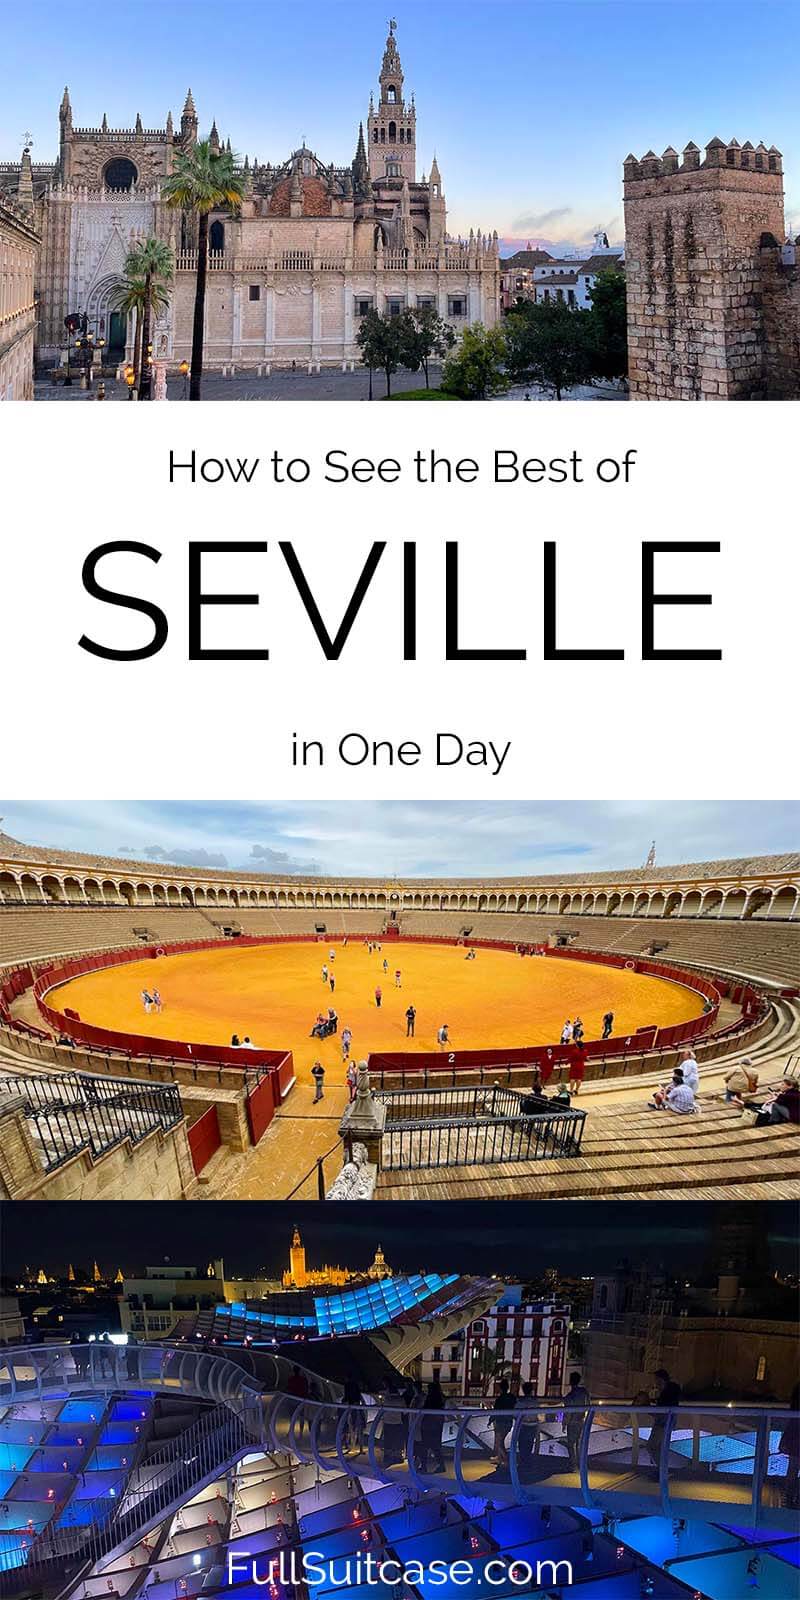 How to see the best of Seville in one day